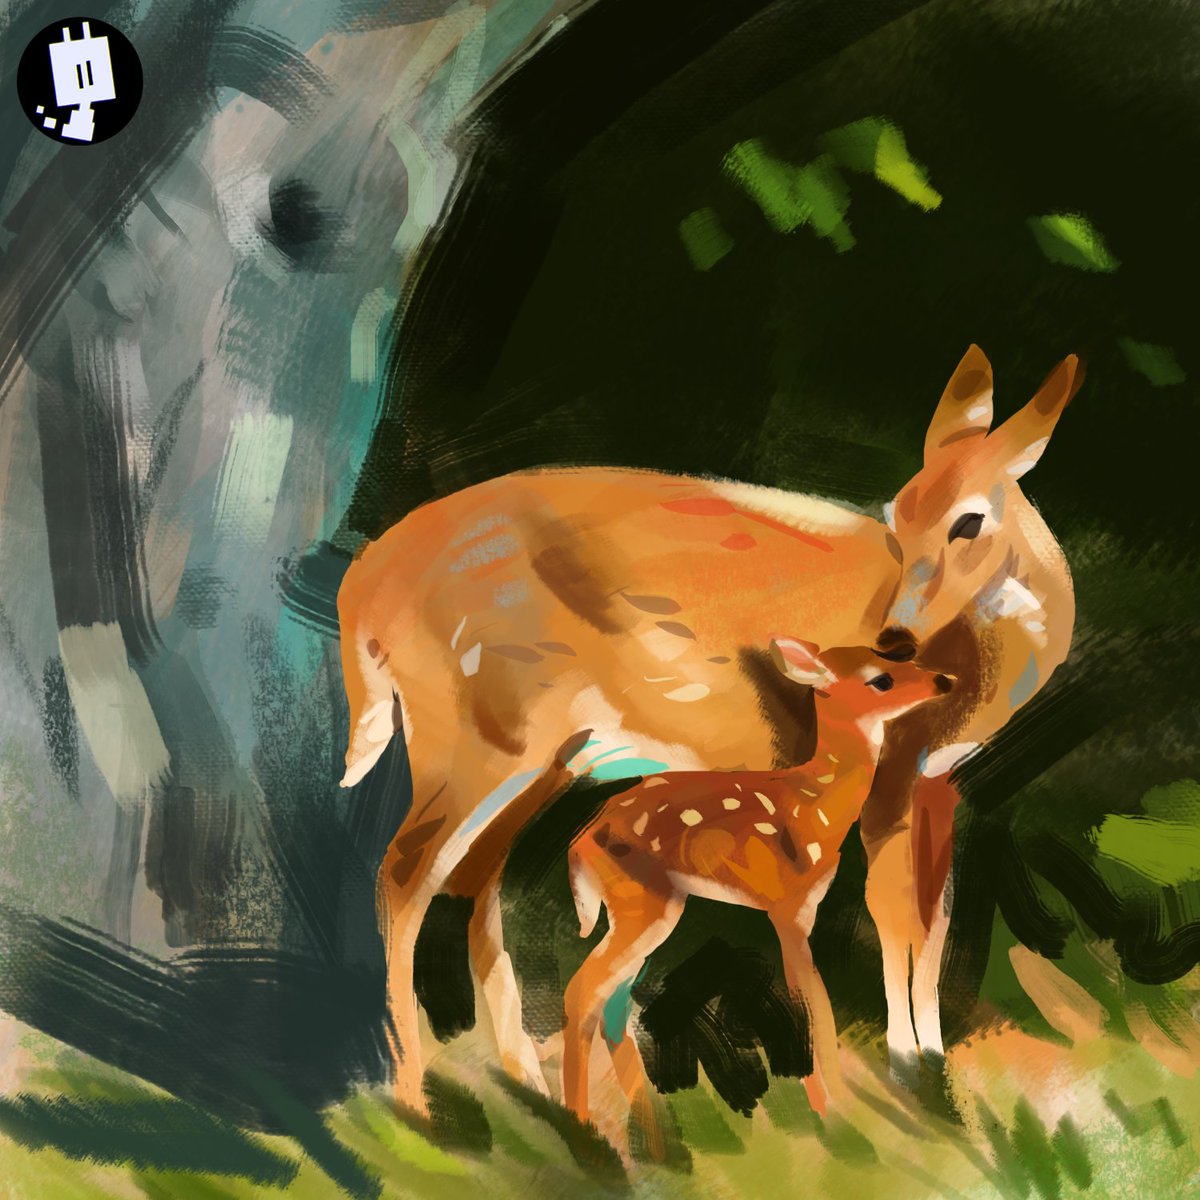 ✤ Mother Doe and Fawn ✤
•
instagram.com/pixi_gags/
•
#deer #doe #fawn #forest #painting 
#art #pixigags #pixi_gags #tree #illustrator #design 
#animation #animatorsofinstagram #colors #naturepainting #visualcomposition #forestanimals #colorpalette #nature